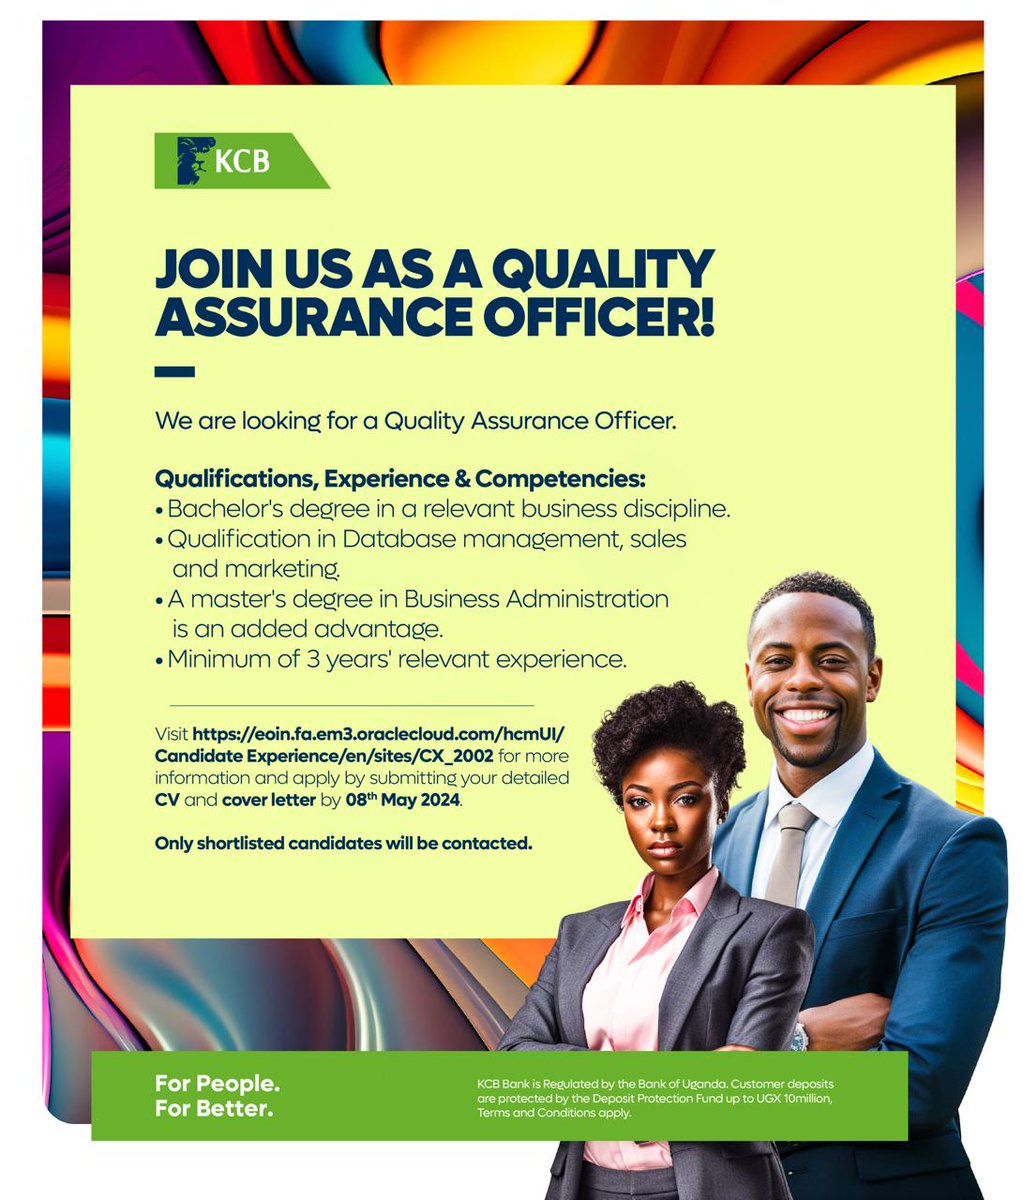 Are you passionate about Quality Assurance? 🤔 We're seeking a driven individual for the role of Quality Assurance Officer. If you have what it takes, apply before 08th May via bit.ly/48bQ5OJ #ForPeopleForBetter